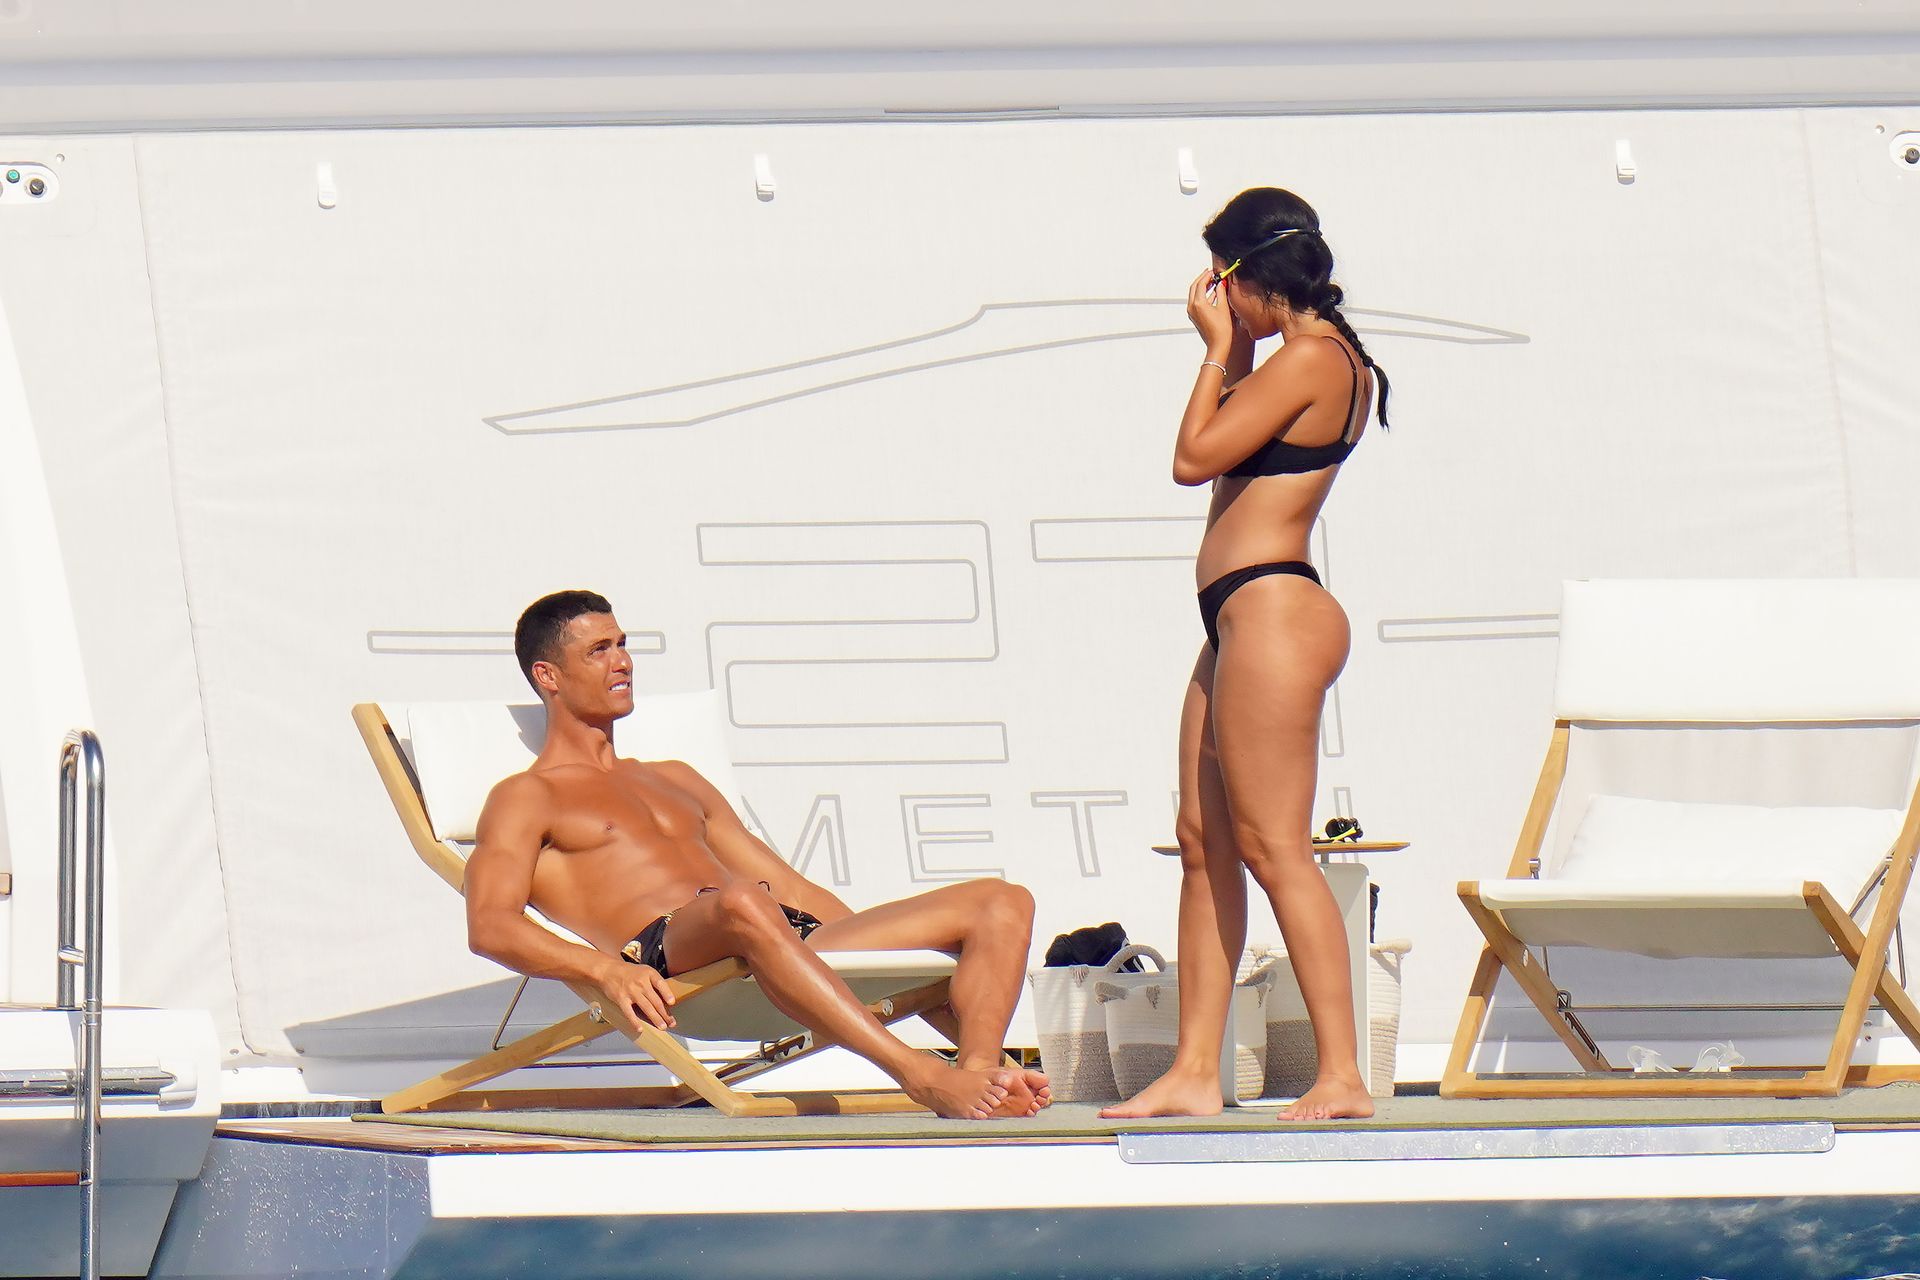 Georgina Rodriguez Shows Off Her Sexy Body on a Yacht (70 Photos)